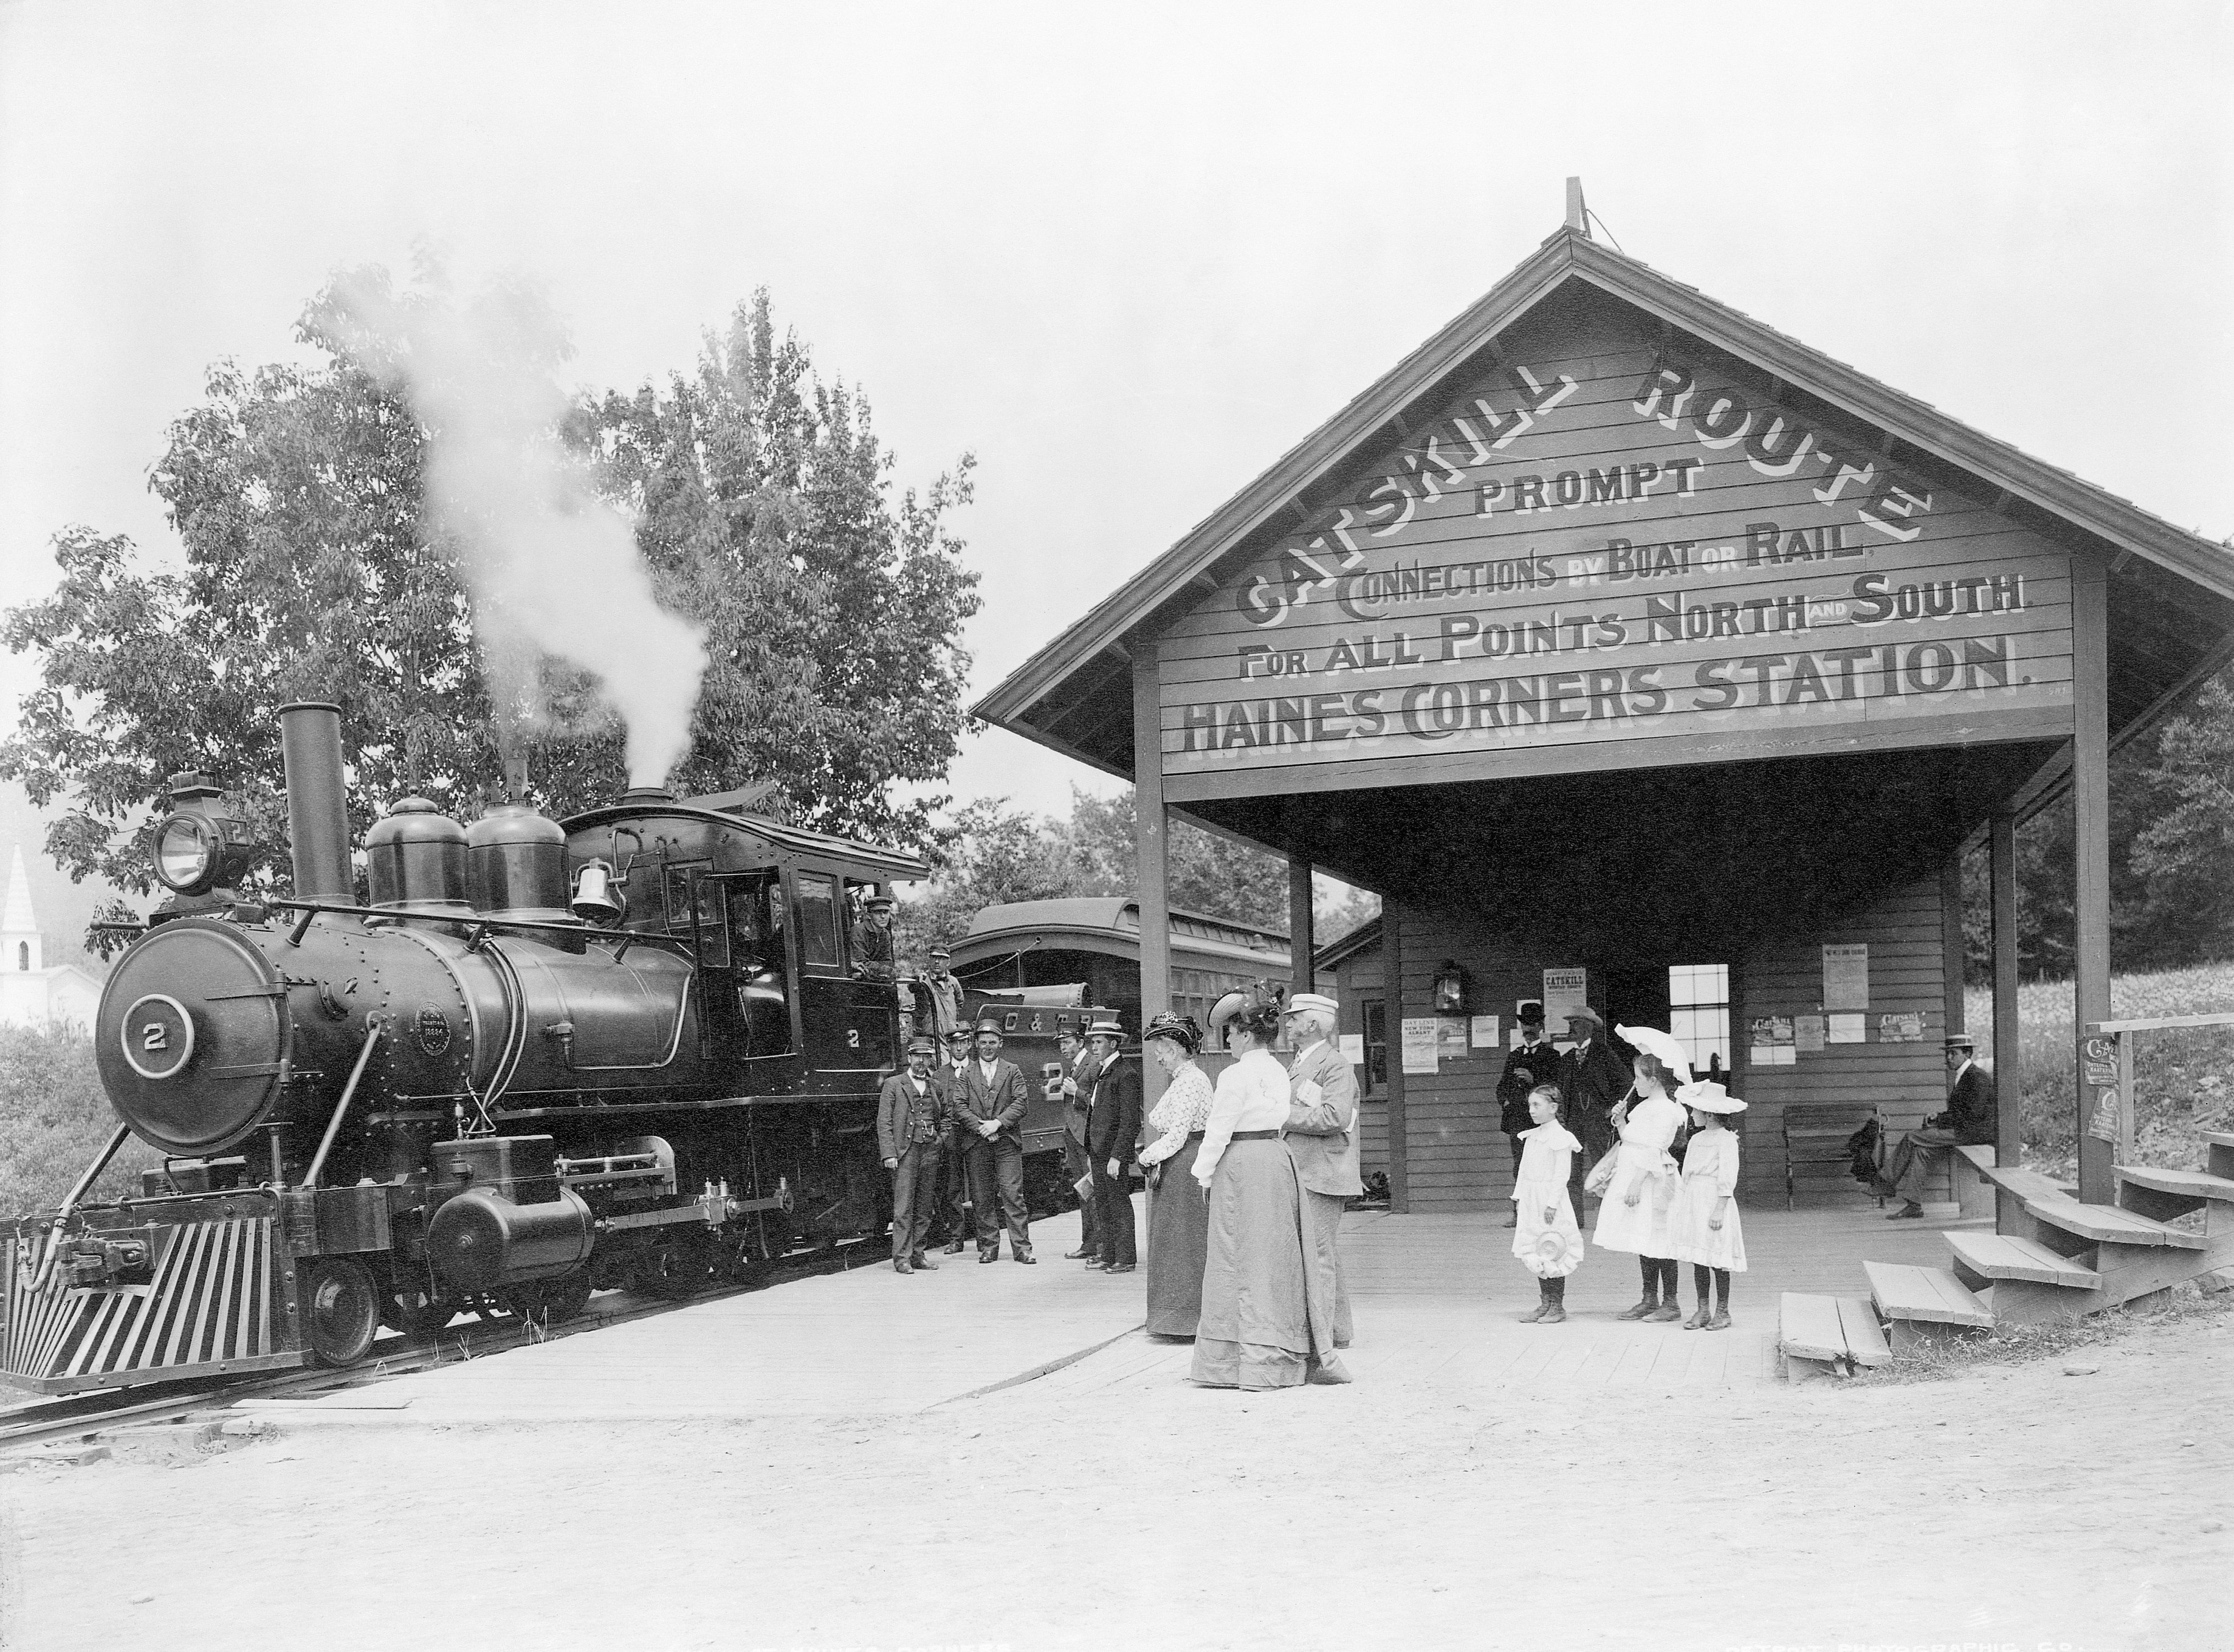 A black and white photo from 1905 shows women and children in long skirts, white shirtwaists, and decorated straw hats standing by a black steam locomotive. Four men in suits and straw brim hats stand by the train, while a group of three little girls in black stockings, white dresses, and large dress hats stand under a wooden siding. Painted on its side gable, facing the viewer, is lettering reading "Catskill Route Prompt Connections by Boat or Rail for all points North and South Haines Corners Station"